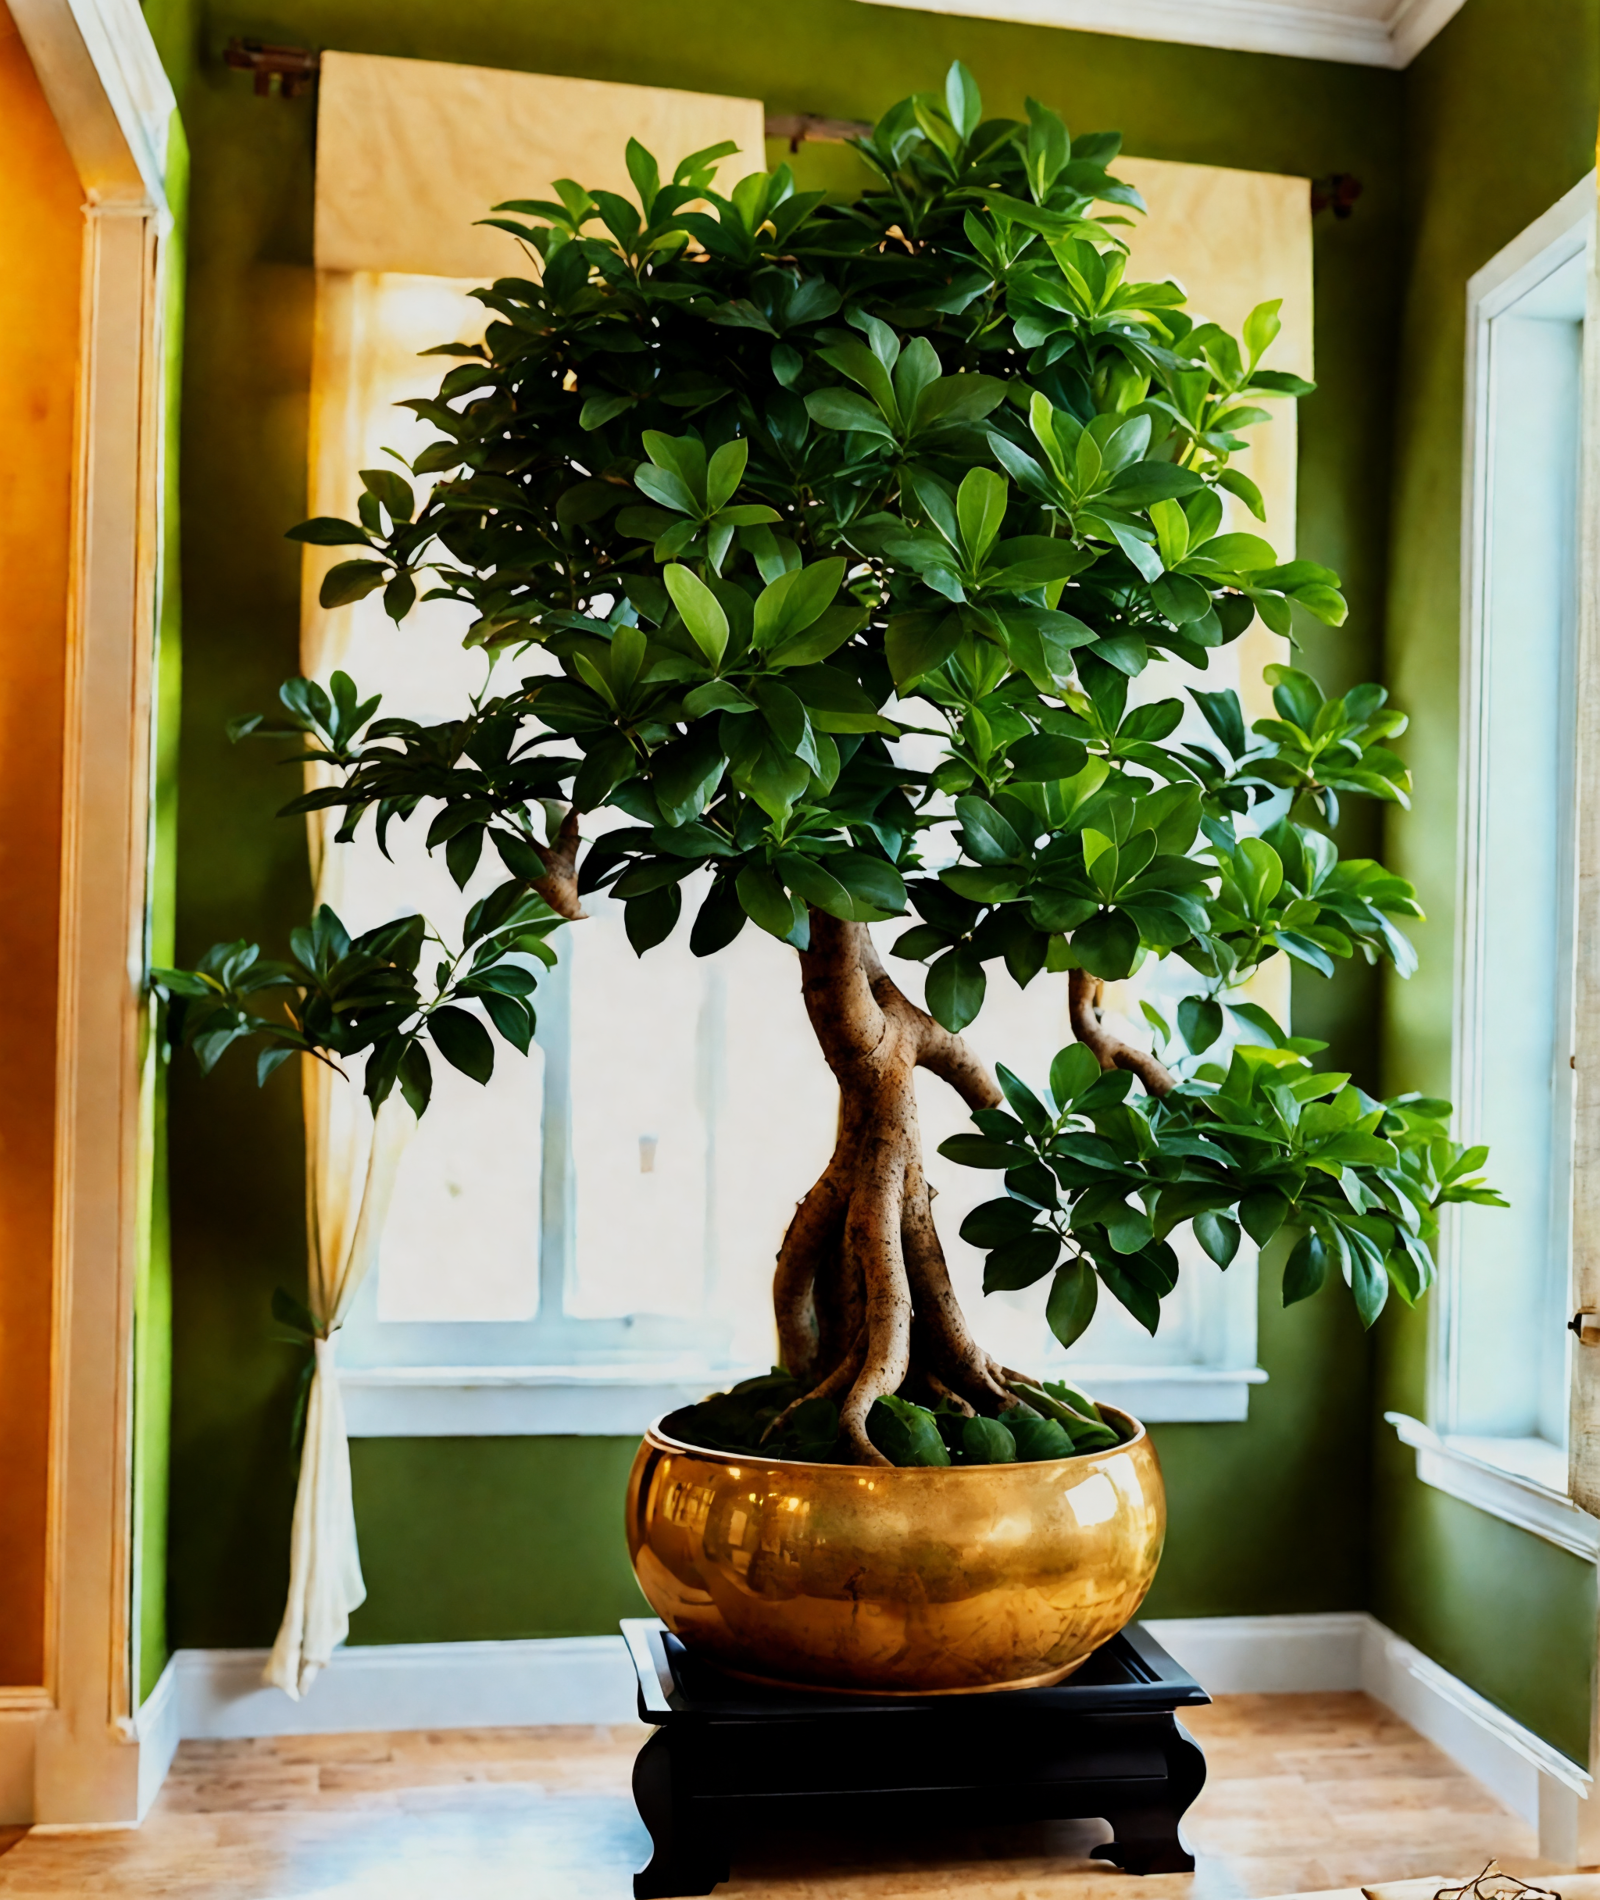 Ficus microcarpa in a large brown vase, with more plants on the floor, in a rustic-style room.